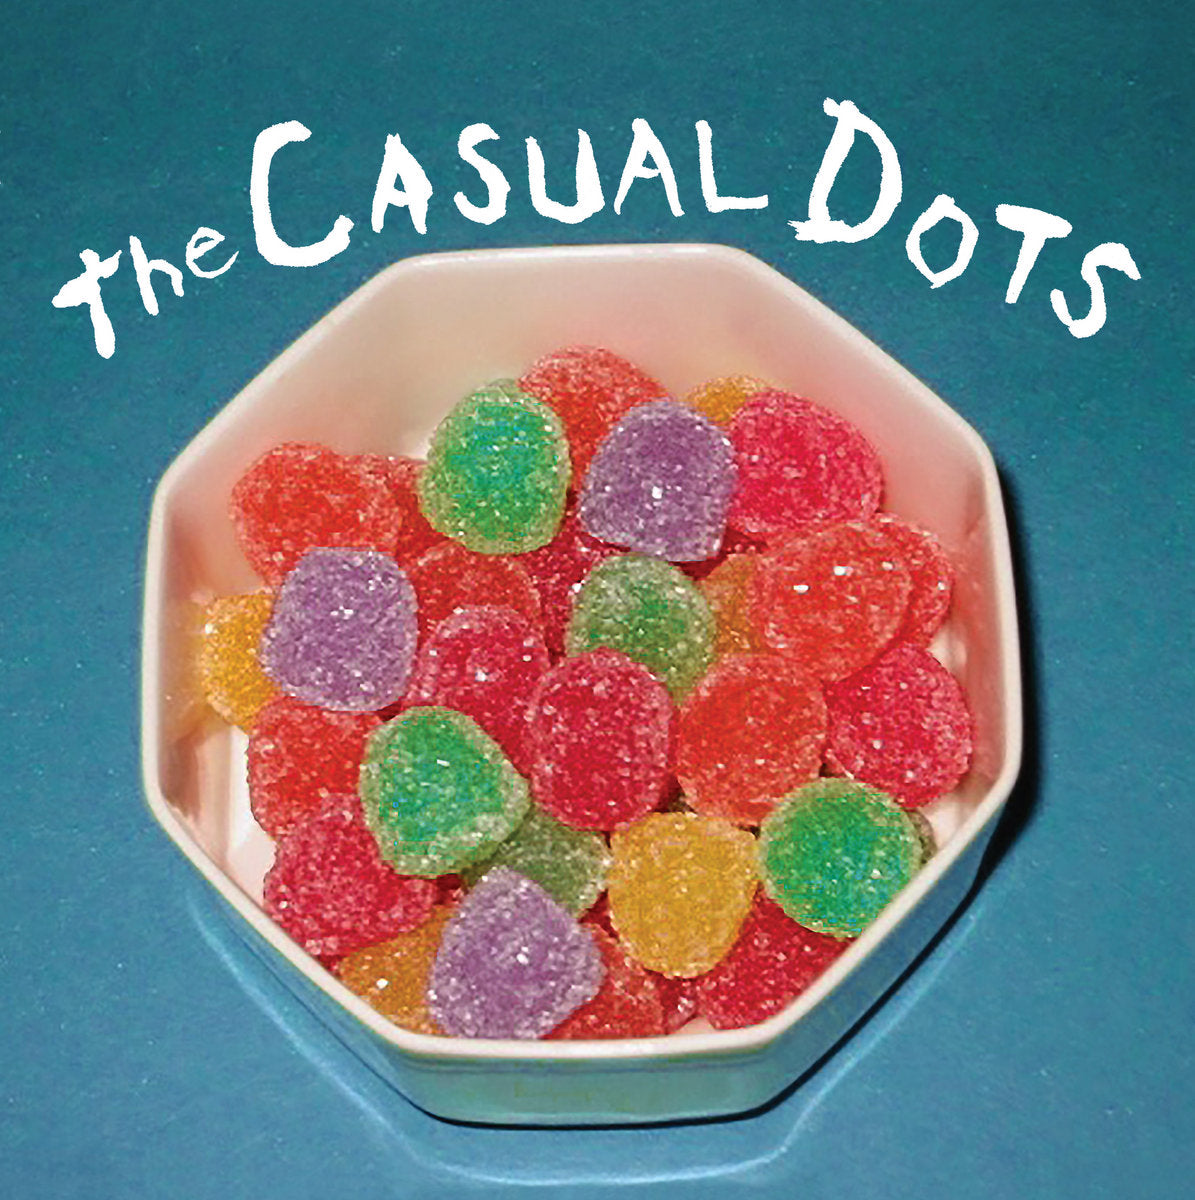 Arcade Sound - The Casual Dots - S/T - LP image